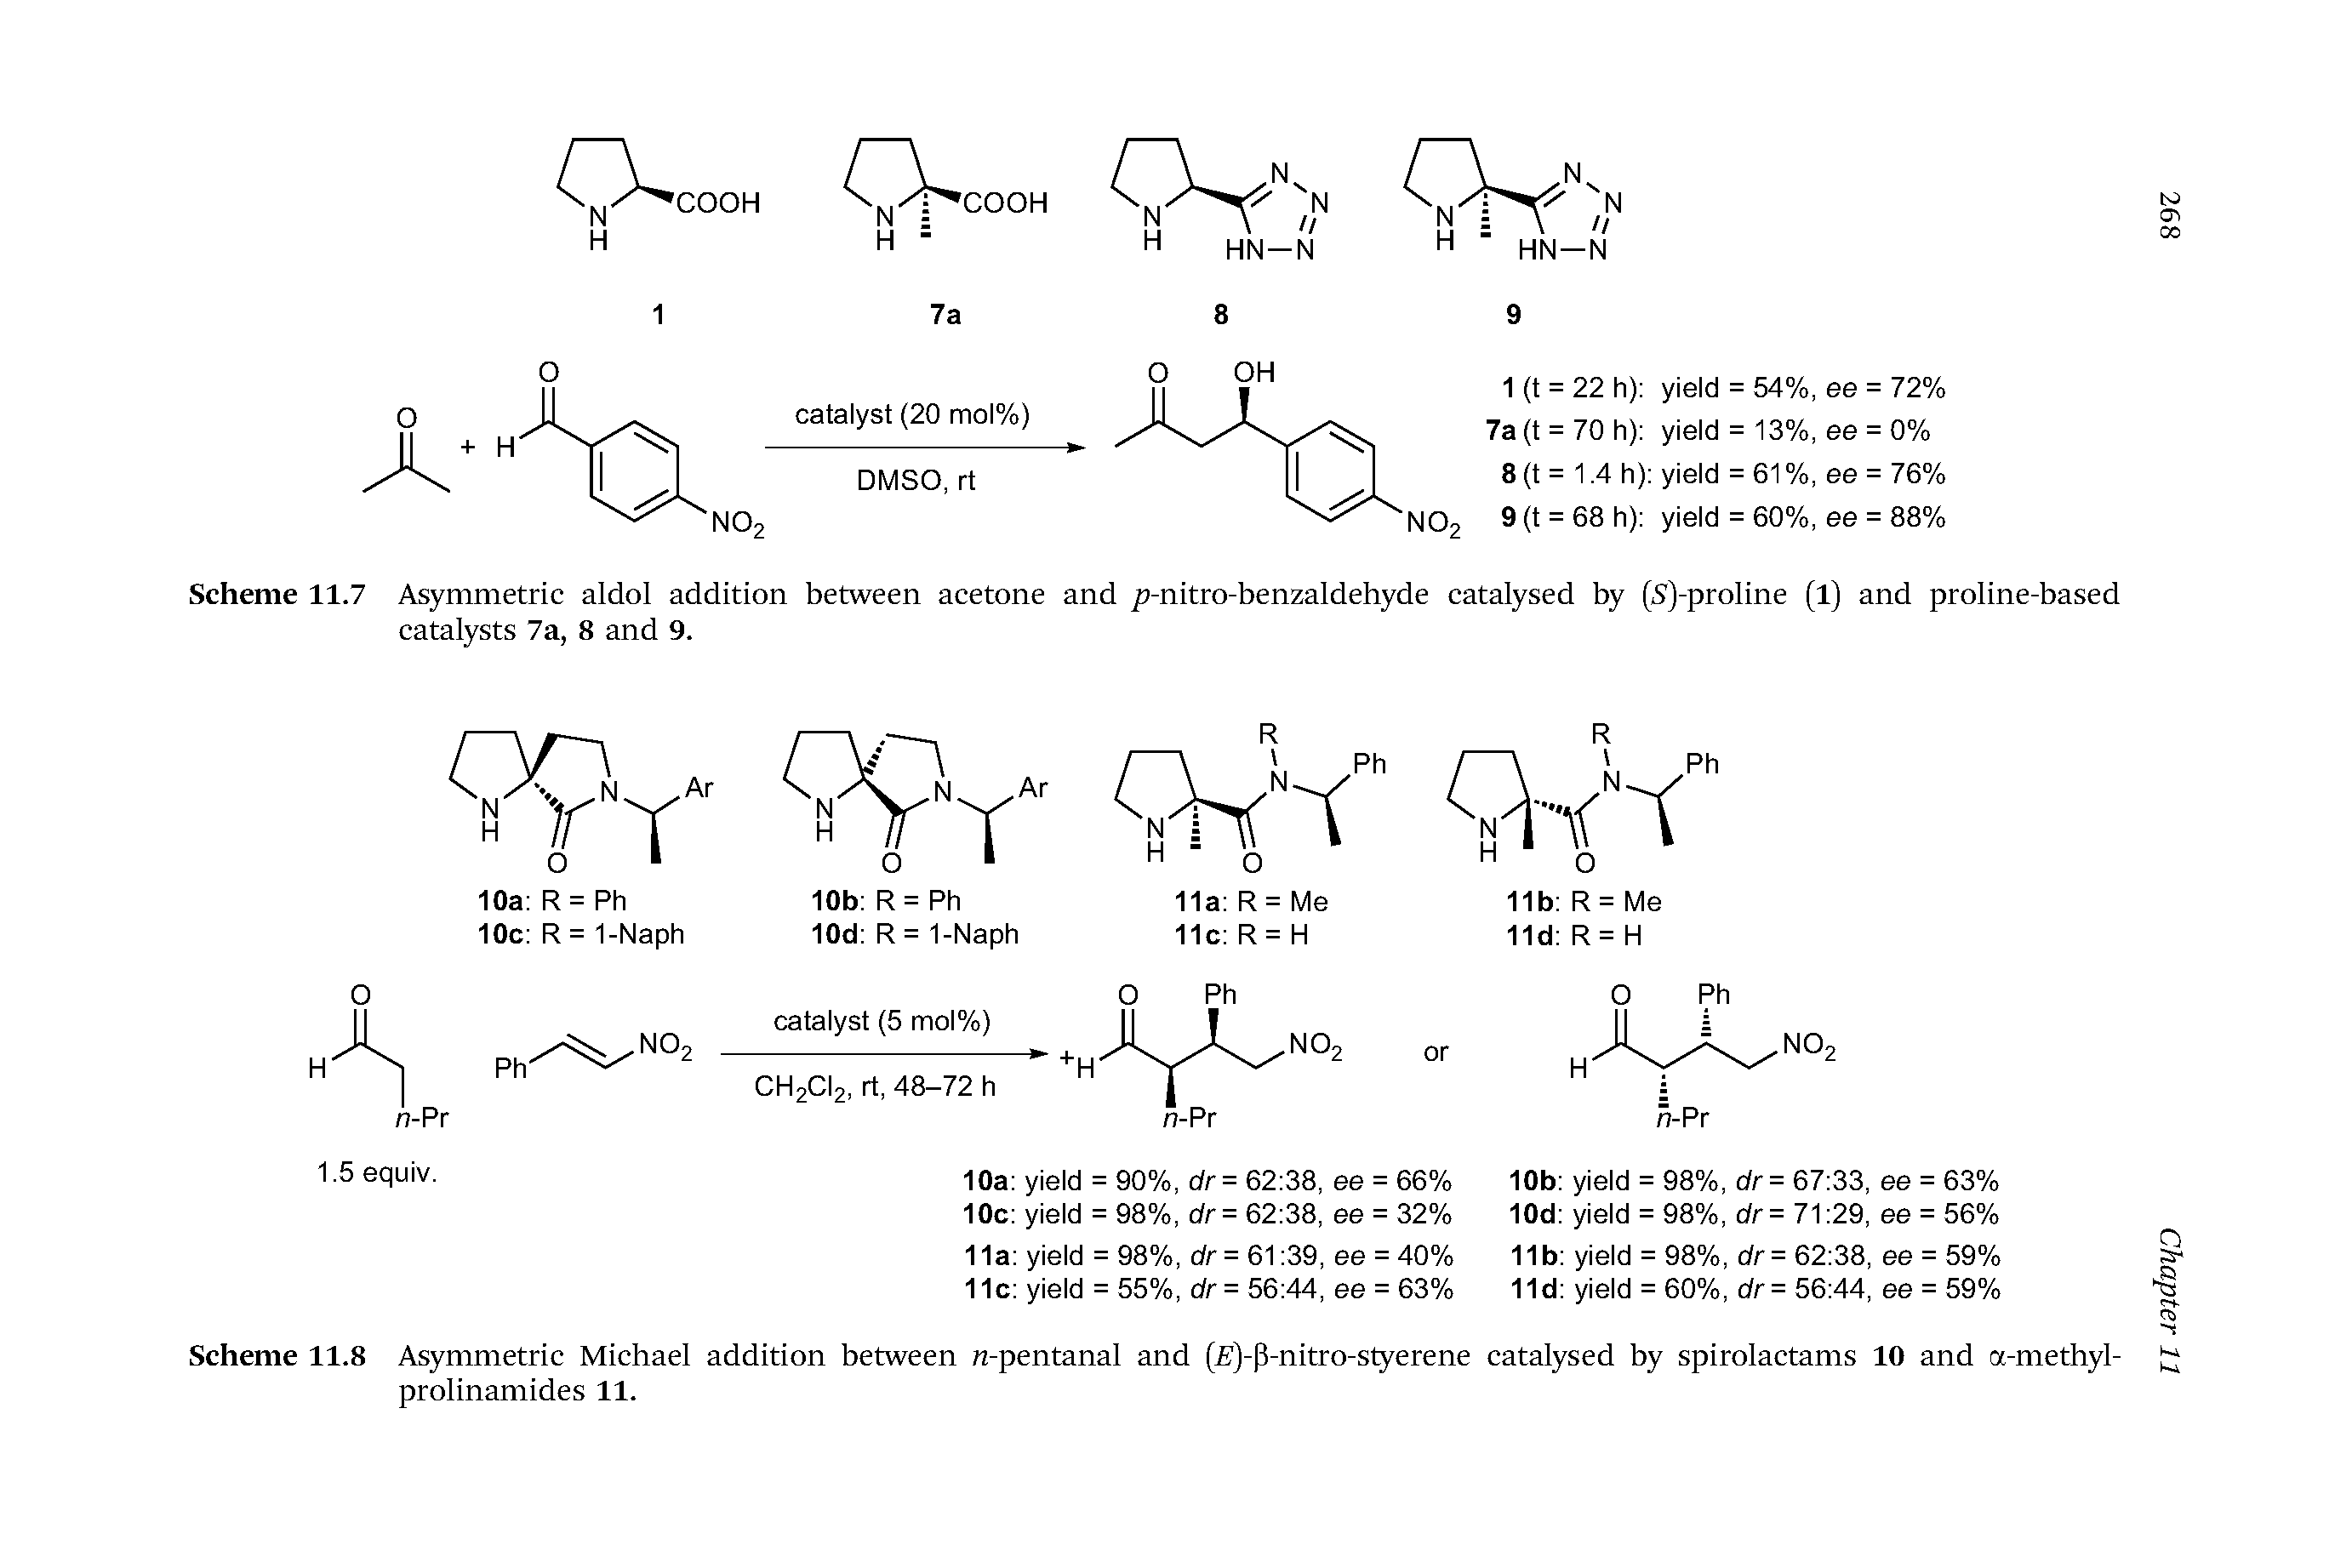 Scheme 11.7 Asymmetric aldol addition between acetone and /i-nitro-benzaldehyde catalysed by (S)-proline (1) and proline-based catalysts 7a, 8 and 9.